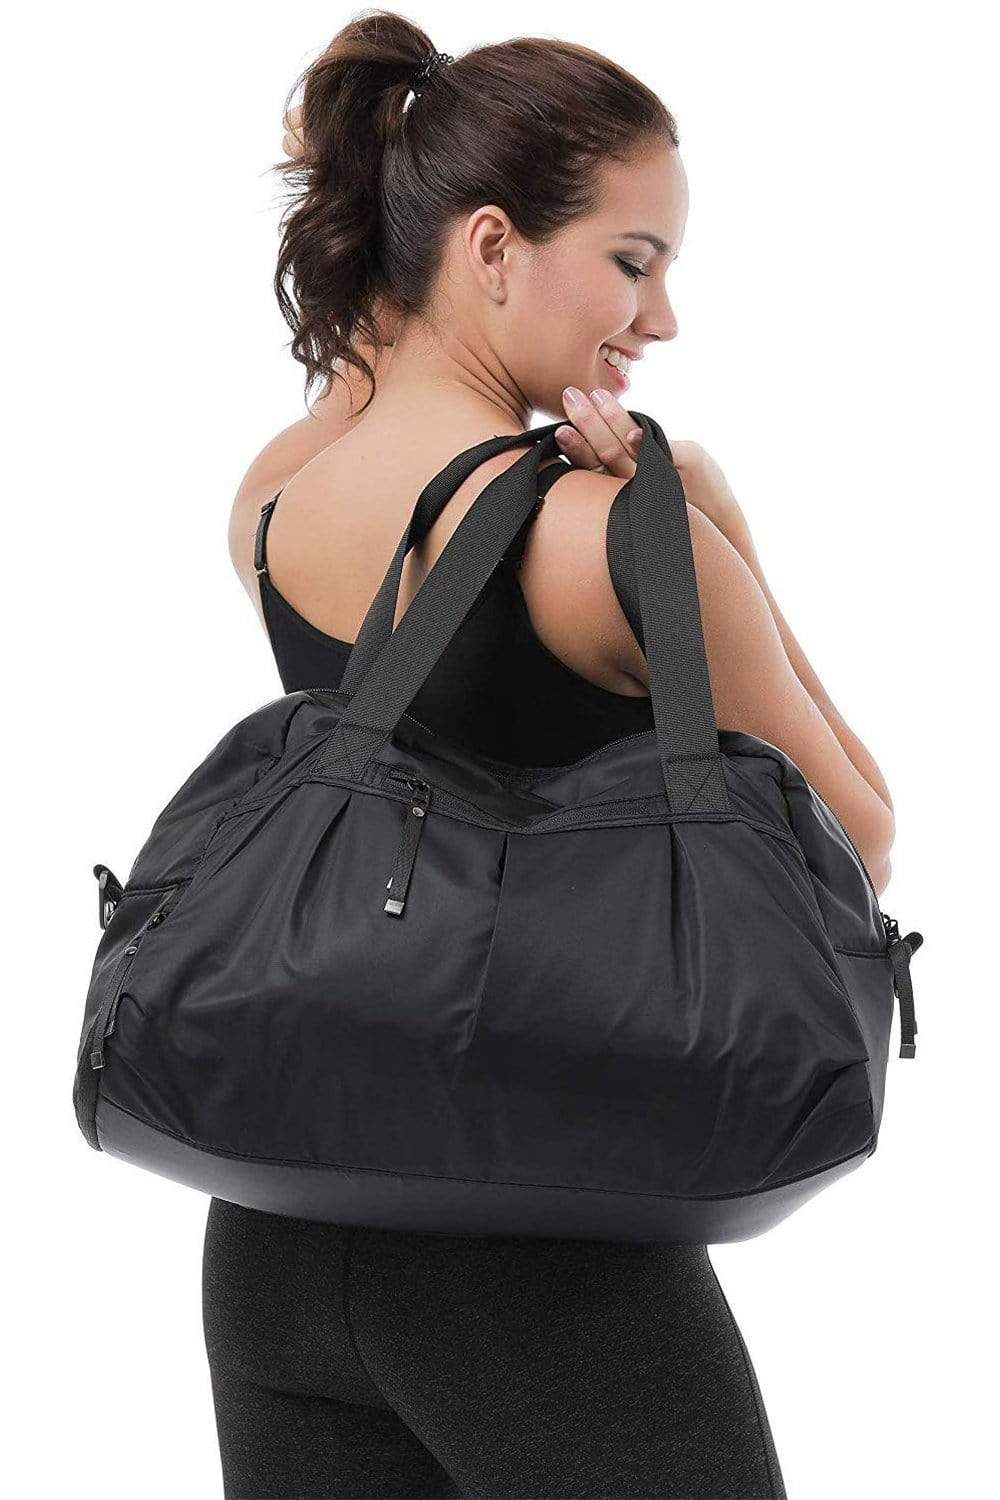 MIER Large Duffel Backpack Bag with Shoe Compartment